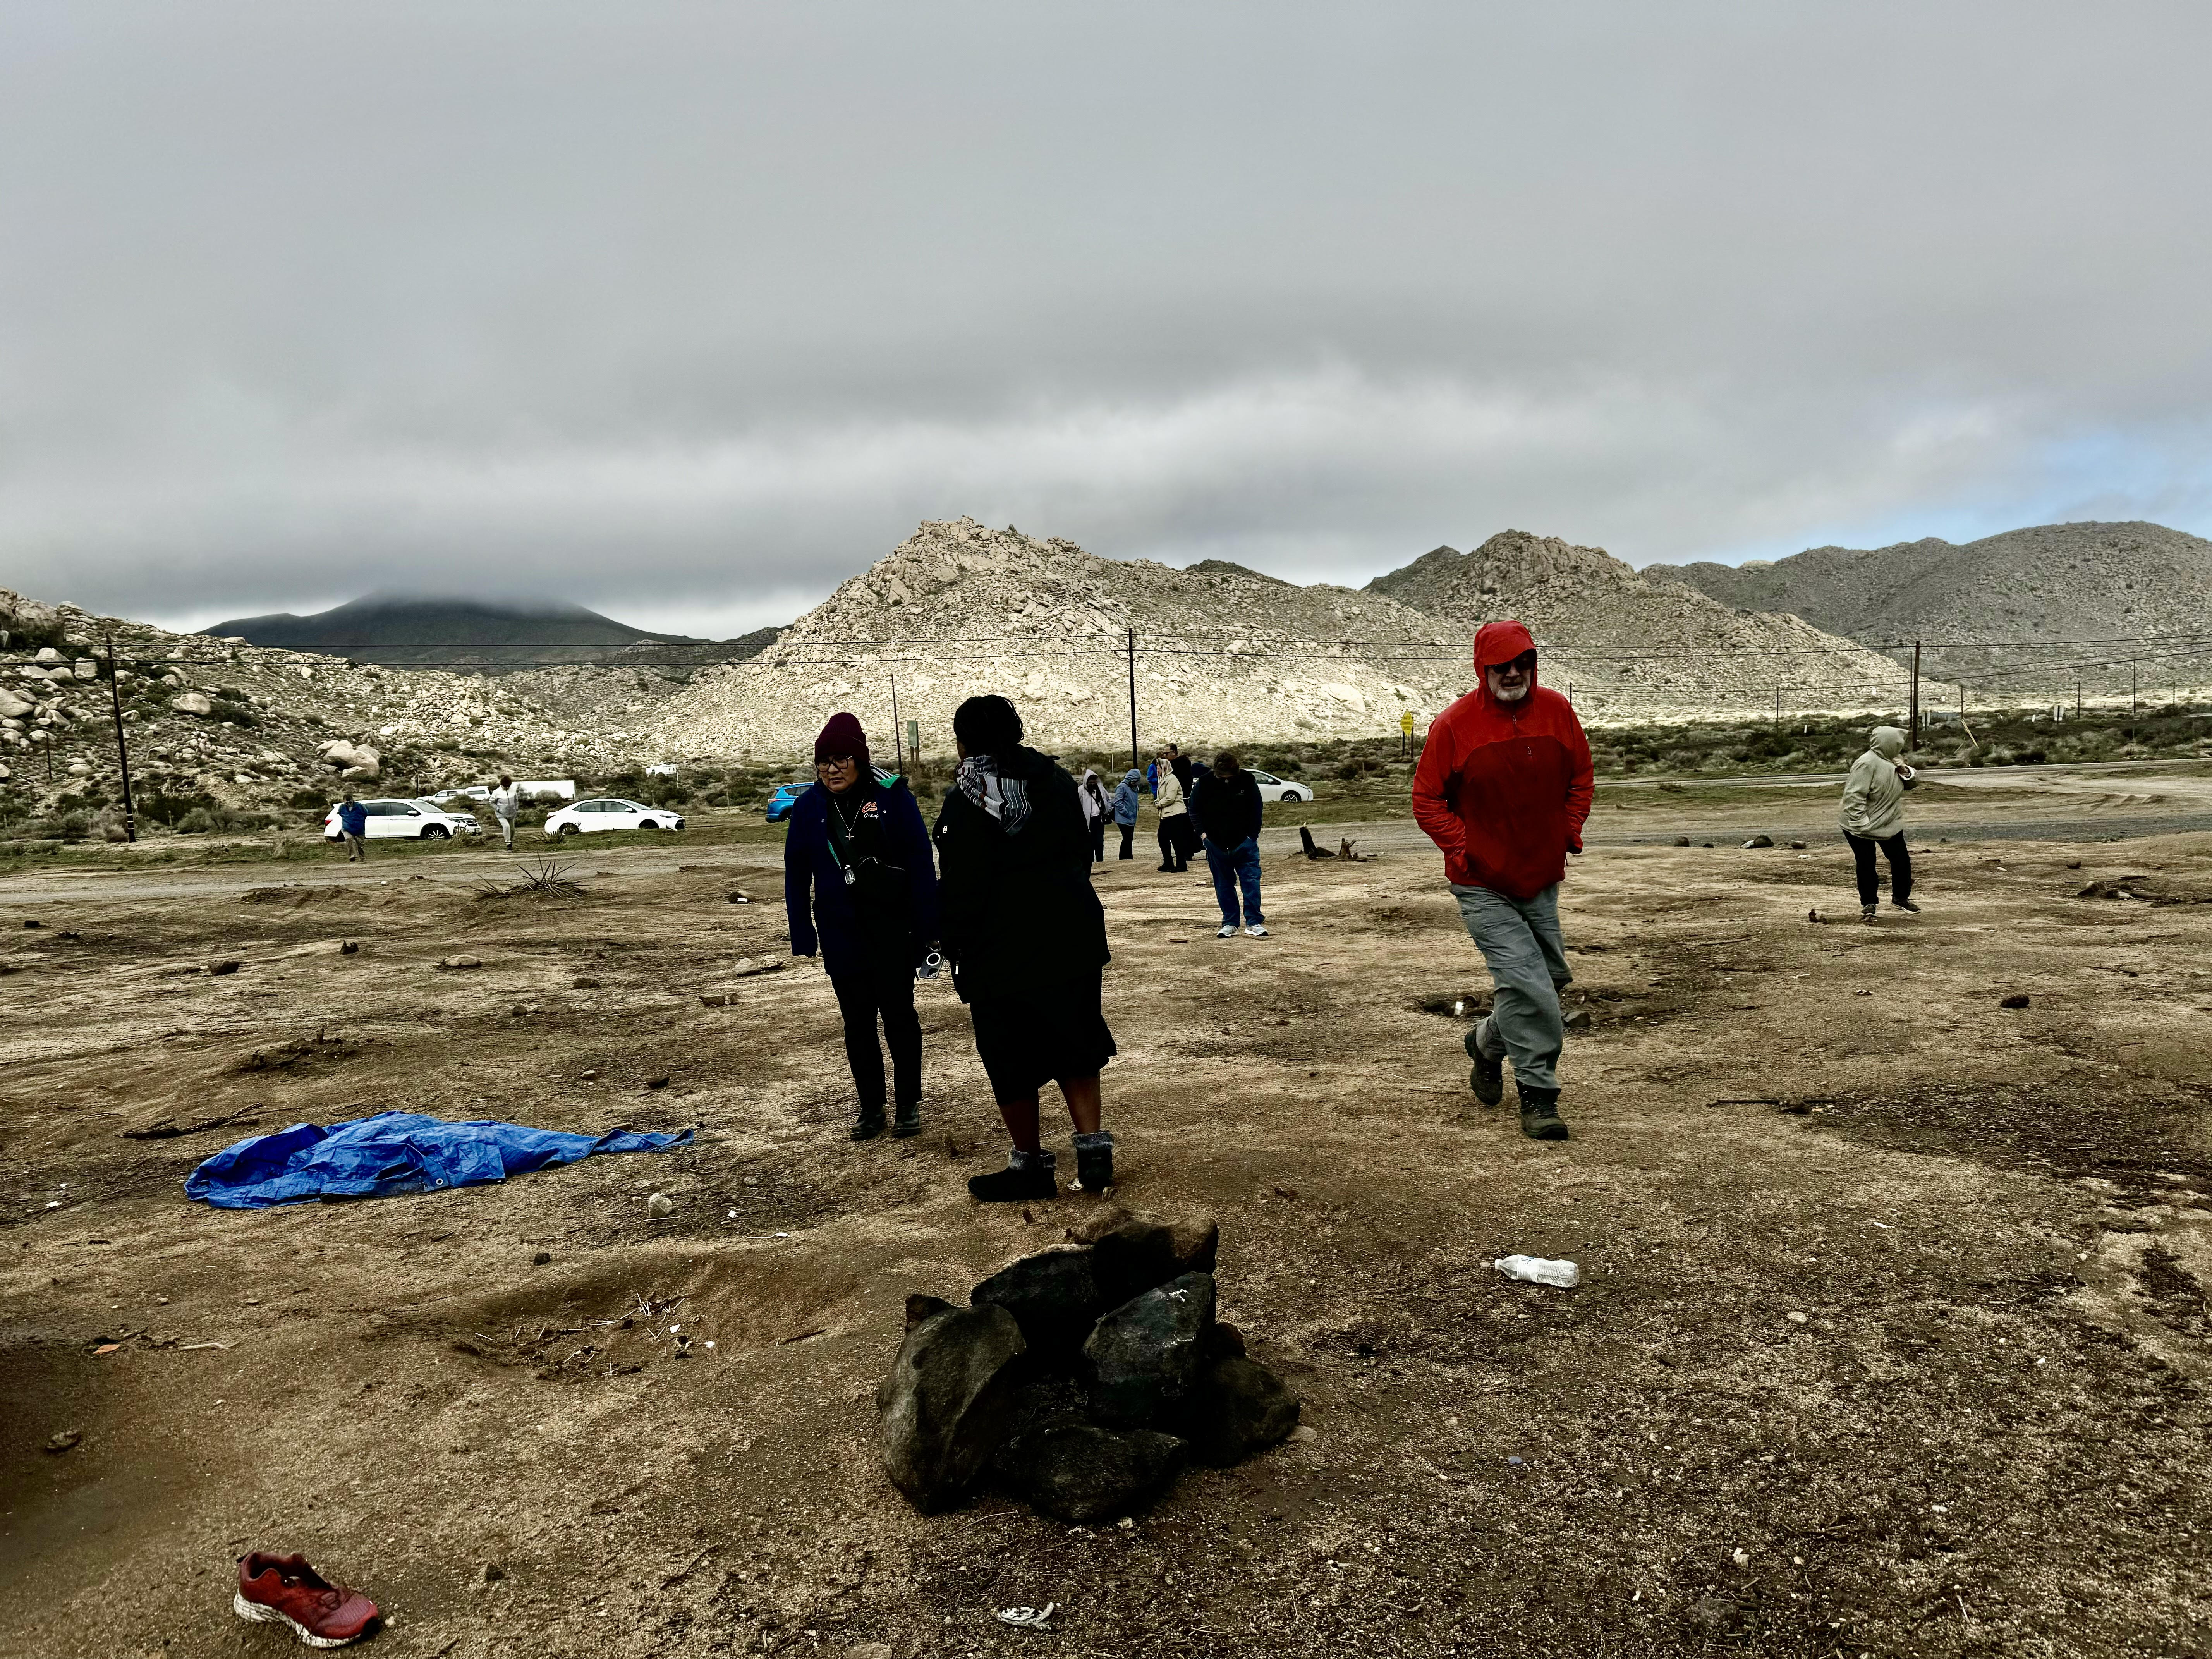 A group of women religious, along with a priest and a Franciscan friar, stop by an abandoned camp in the desert, near Jacumba Hot Springs, south of San Diego, Feb. 7. Some prayed near the shoes, tattered tents and wet sleeping bags left behind where migrants sought shelter from the cold rain and snowstorms affecting the San Diego region this winter. (GSR photo/Rhina Guidos) 